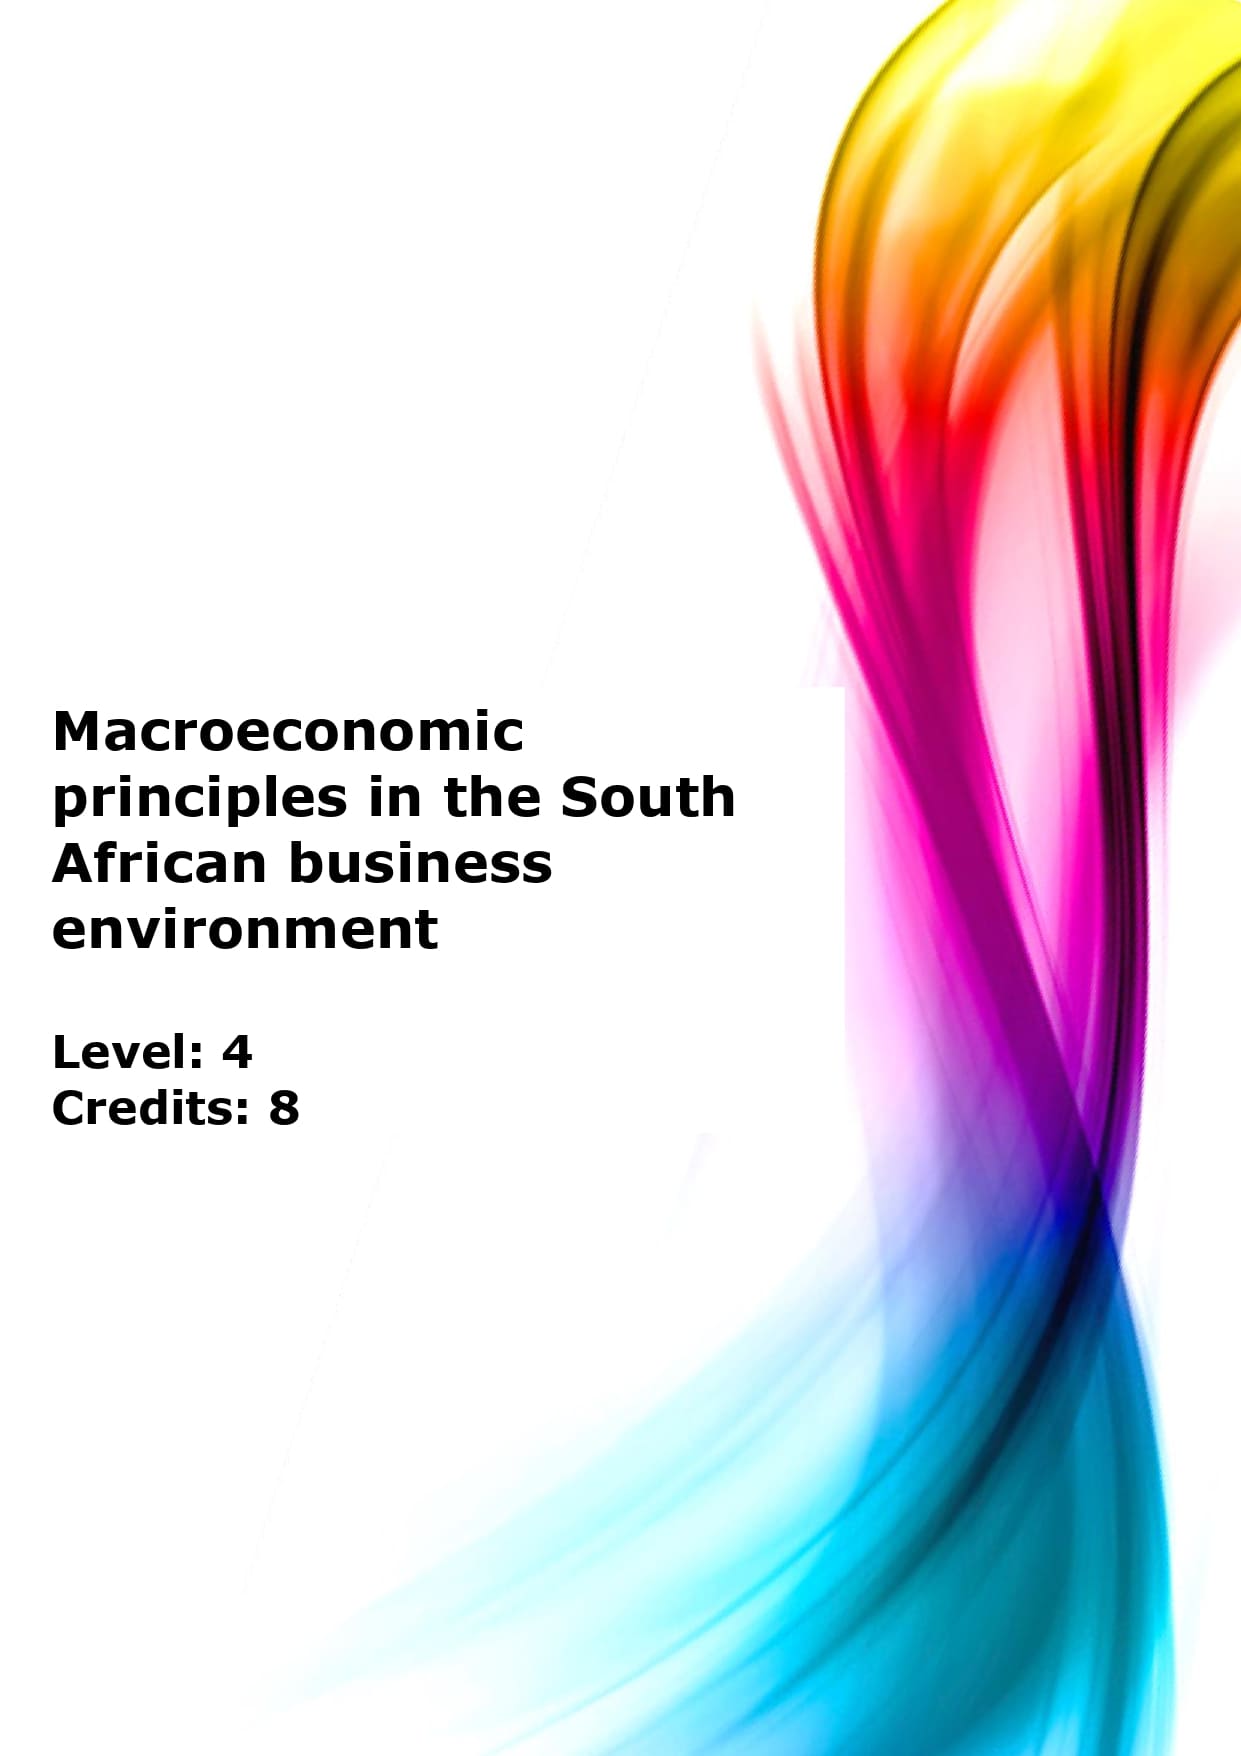 Demonstrate an understanding of macroeconomic principles as they apply to the South African business environment US